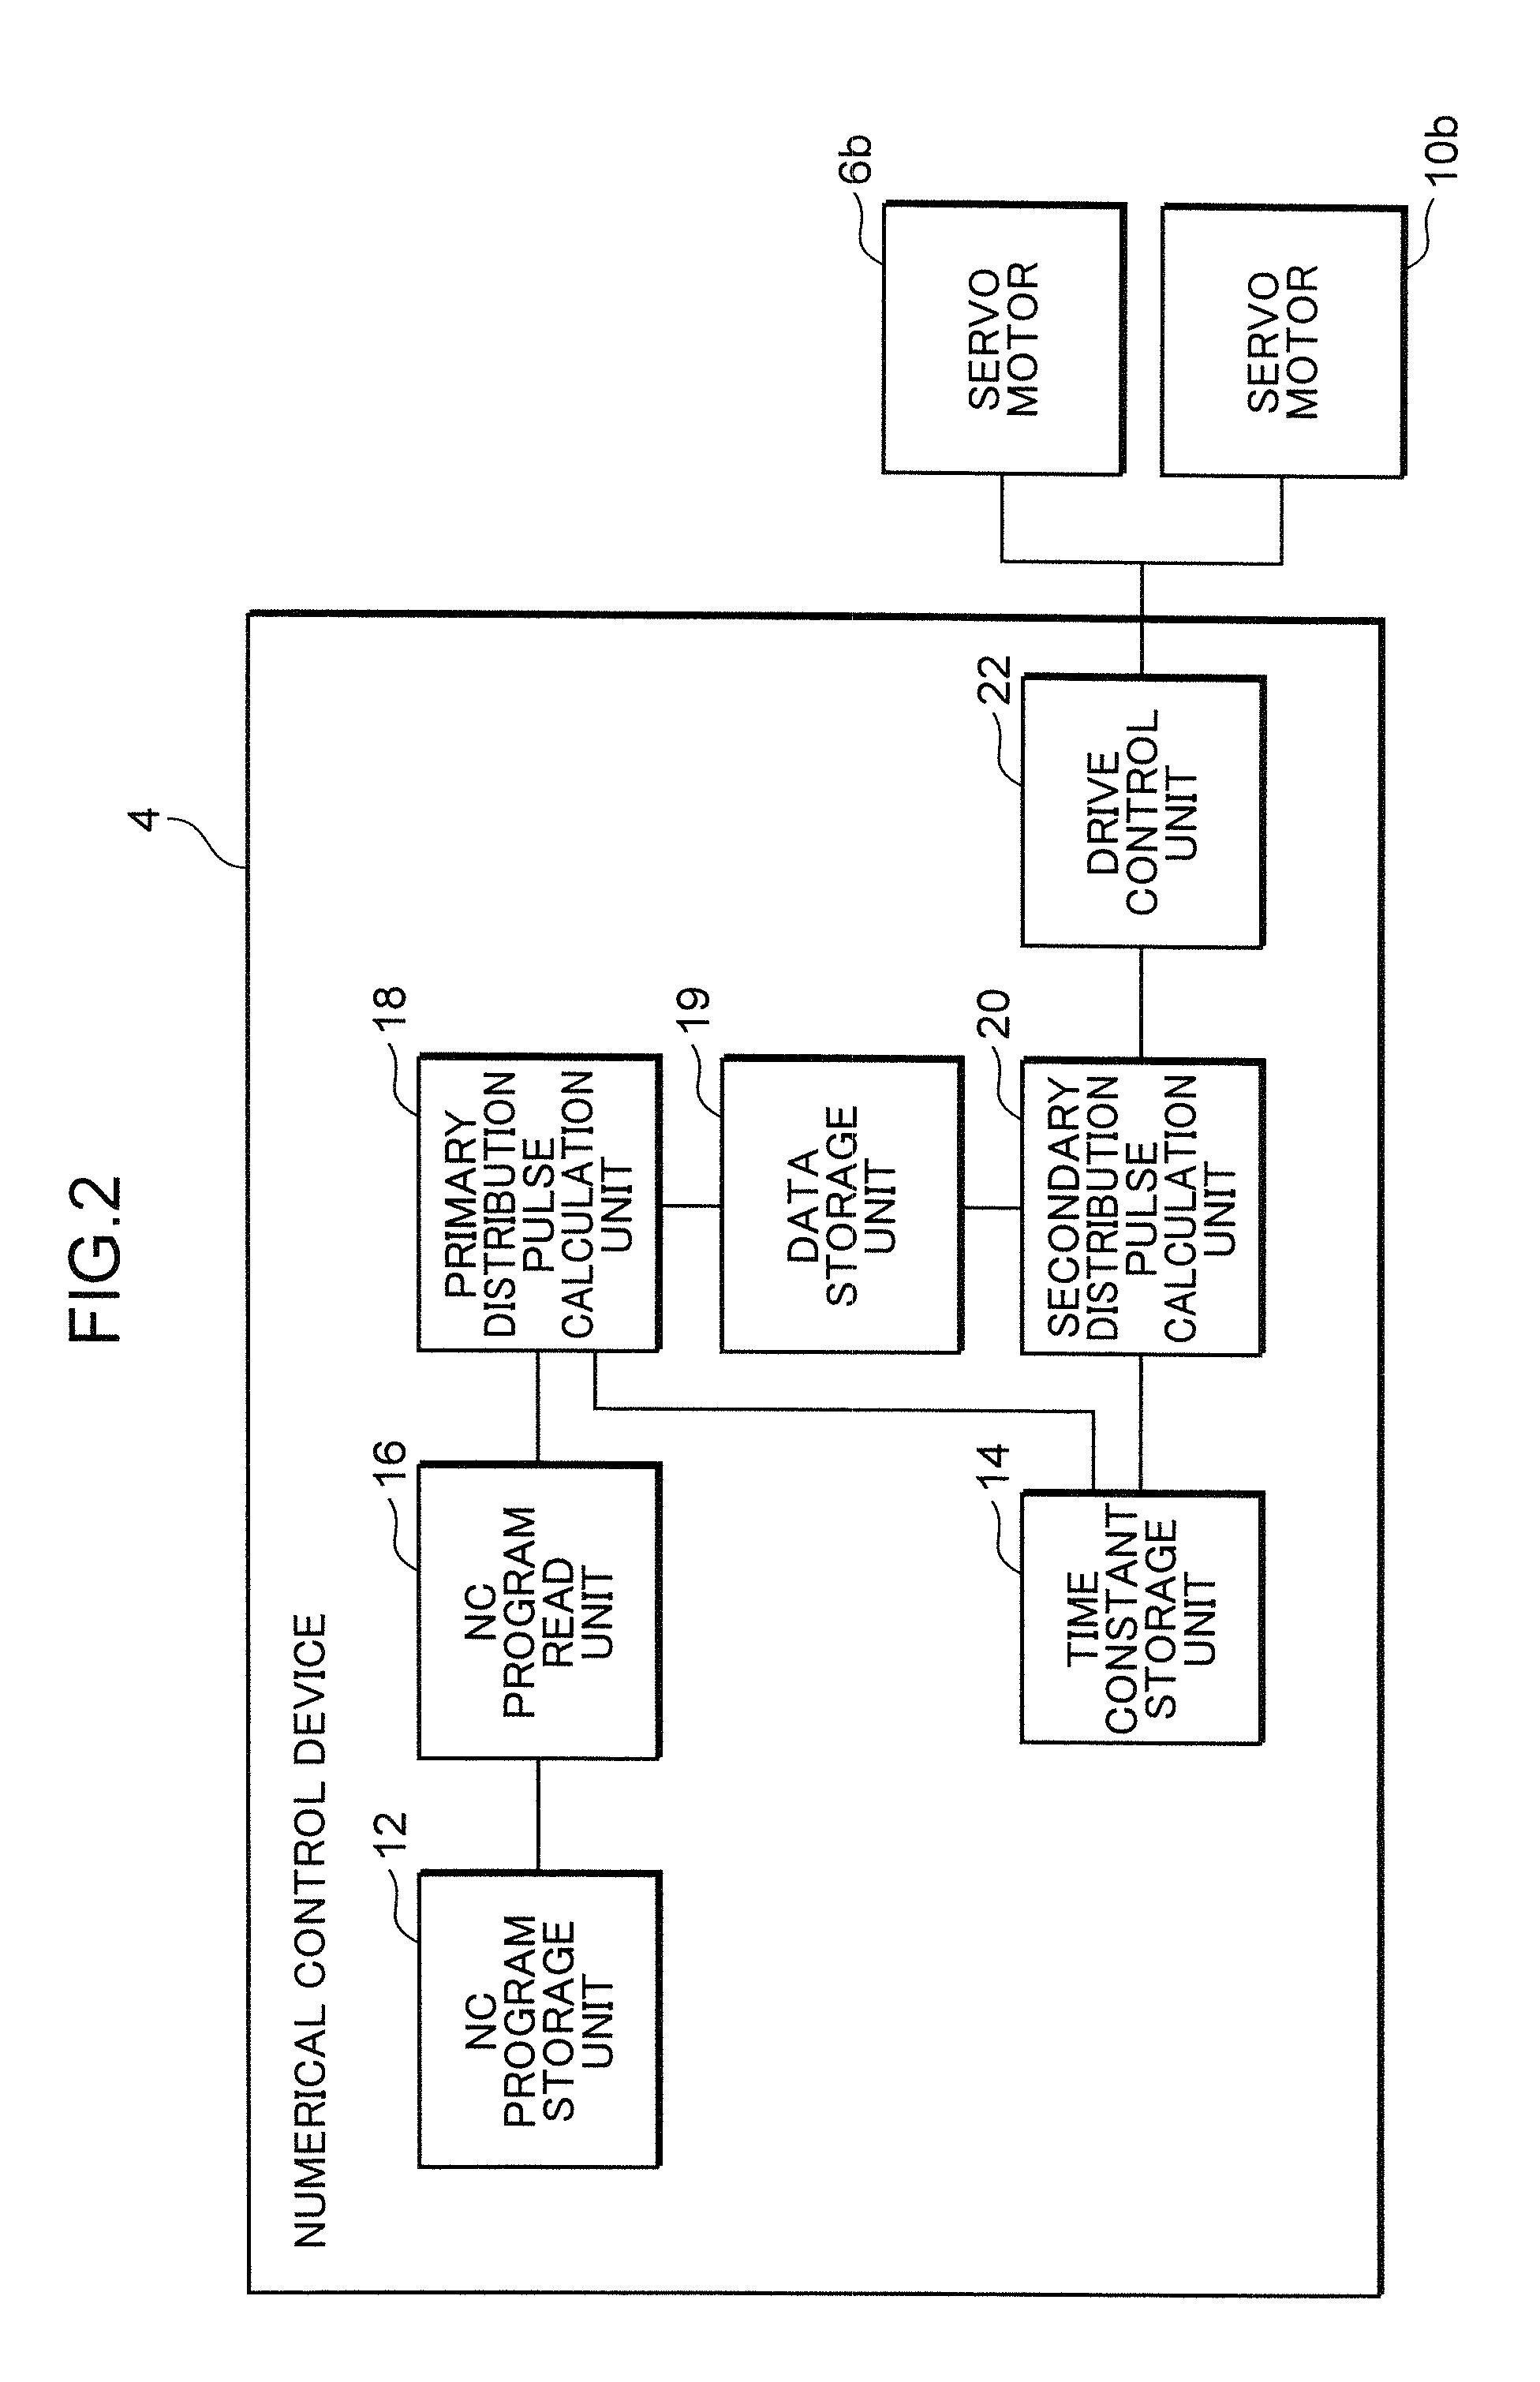 Numerical control device for tool machine